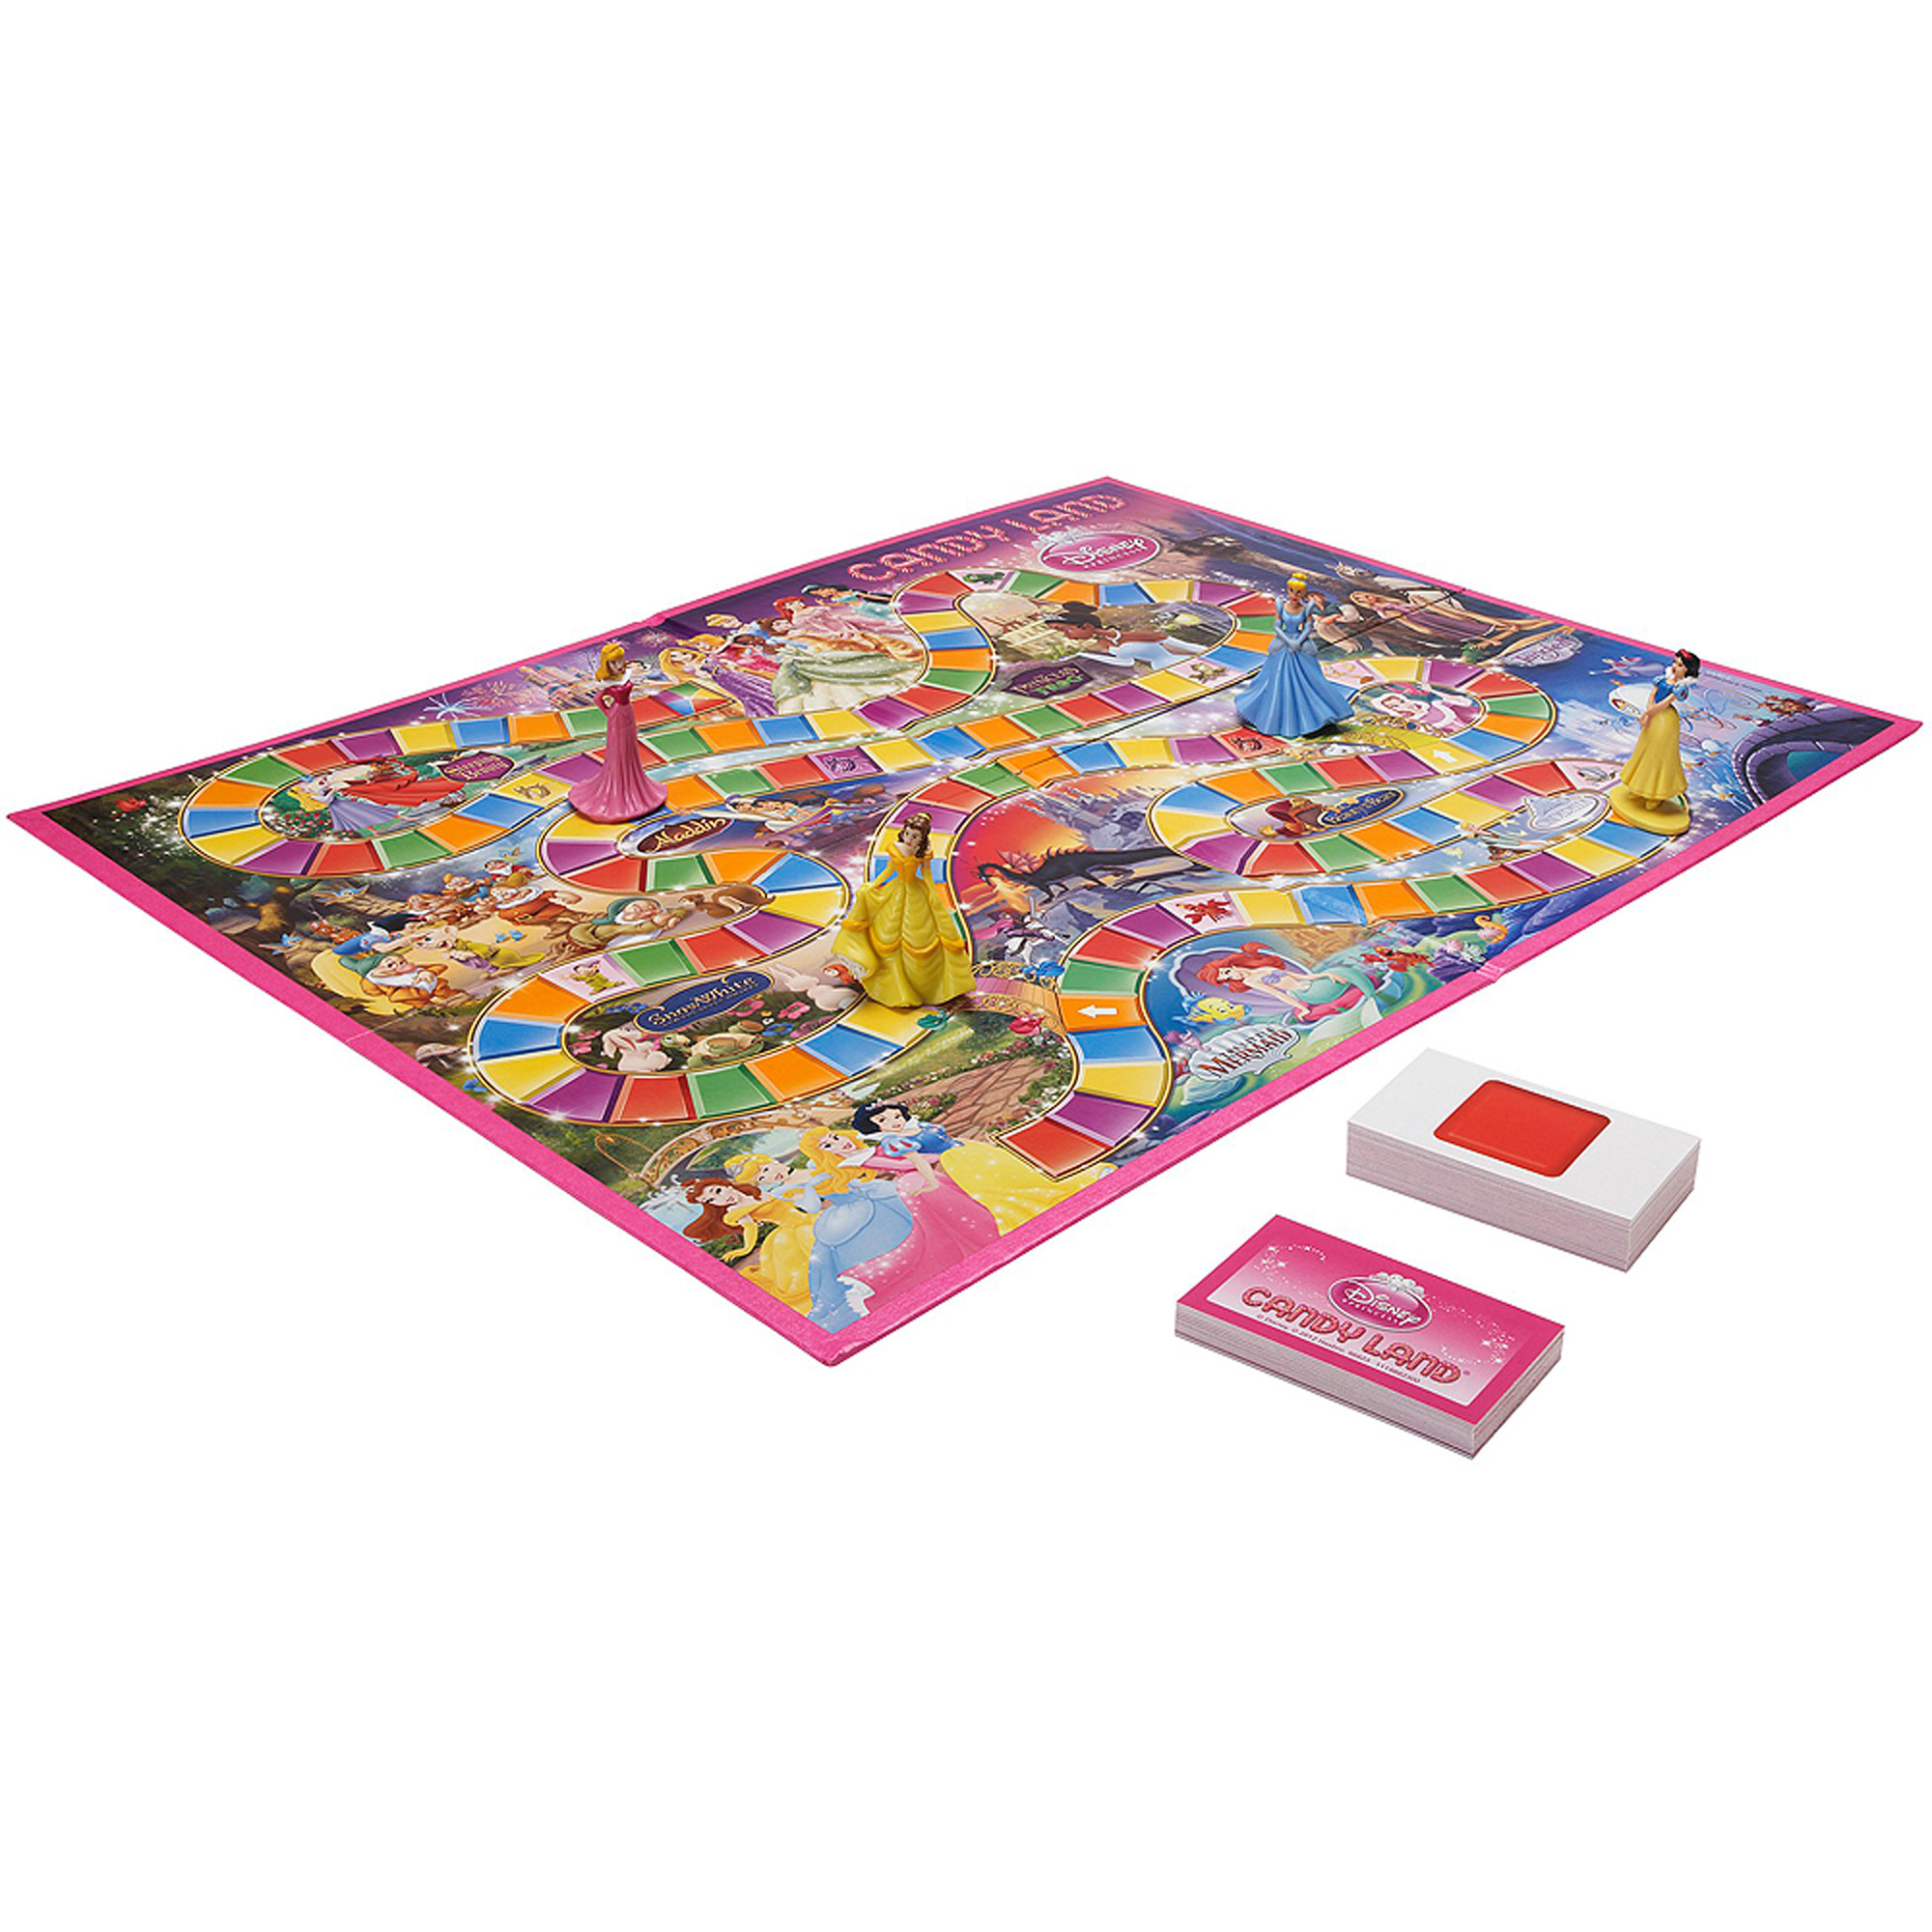 Candy Land Disney Princess Edition, For 2 to 4 players - image 3 of 9